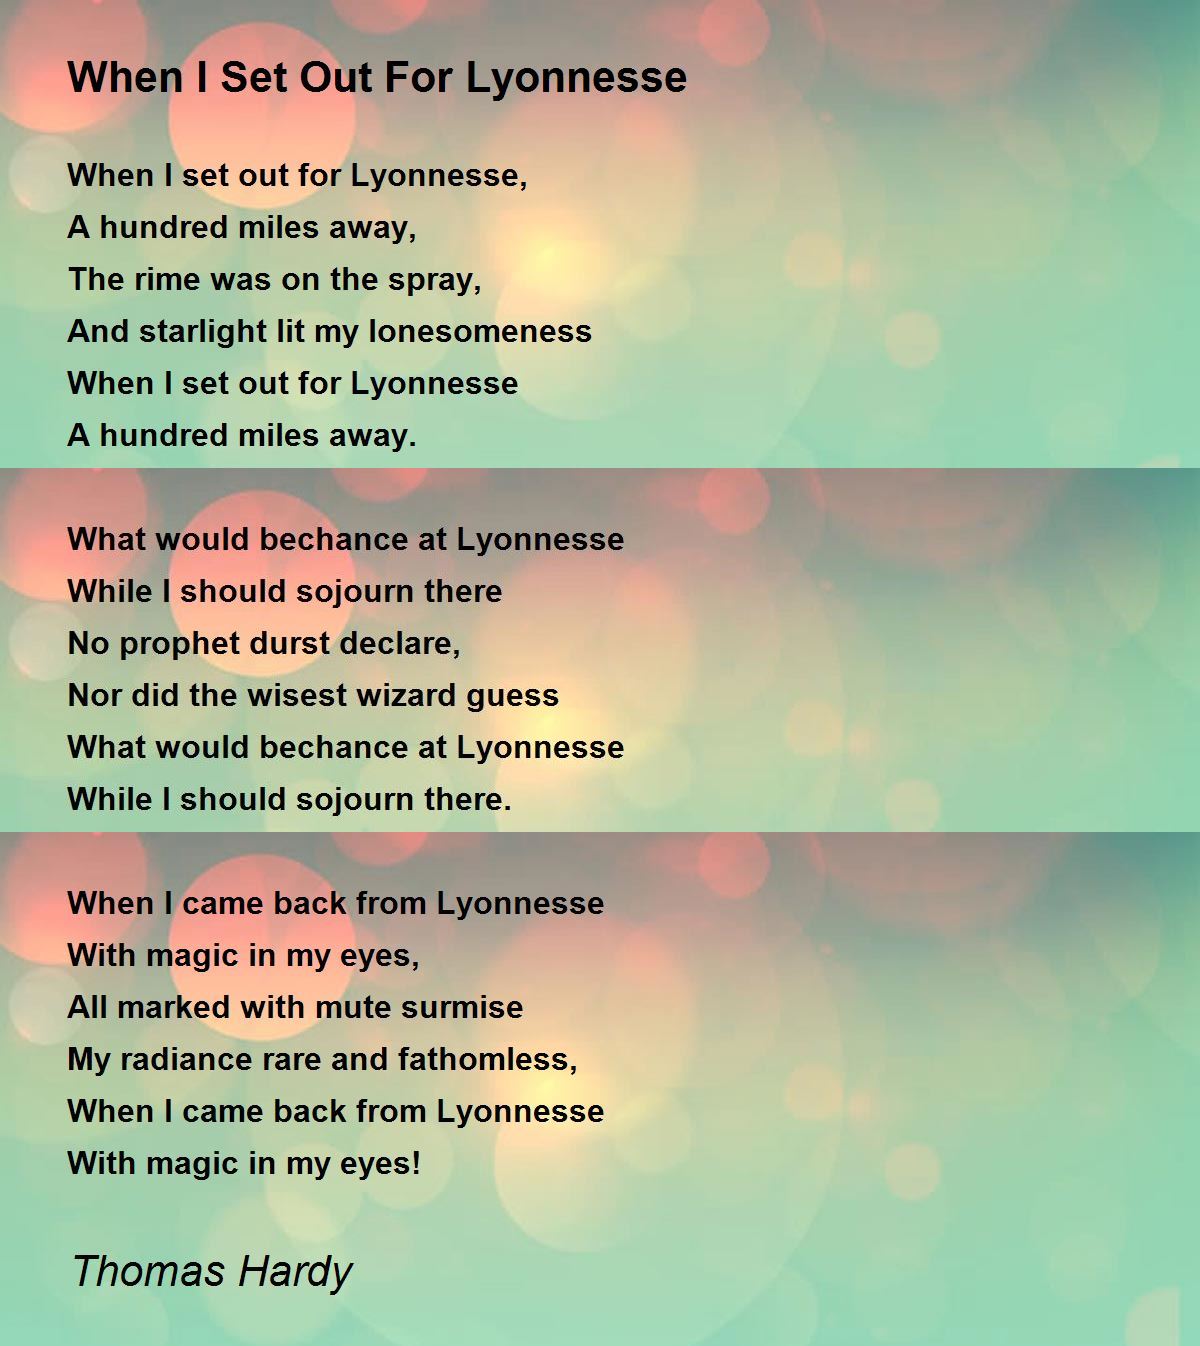 When I Set Out For Lyonnesse Poem by Thomas Hardy - Poem Hunter